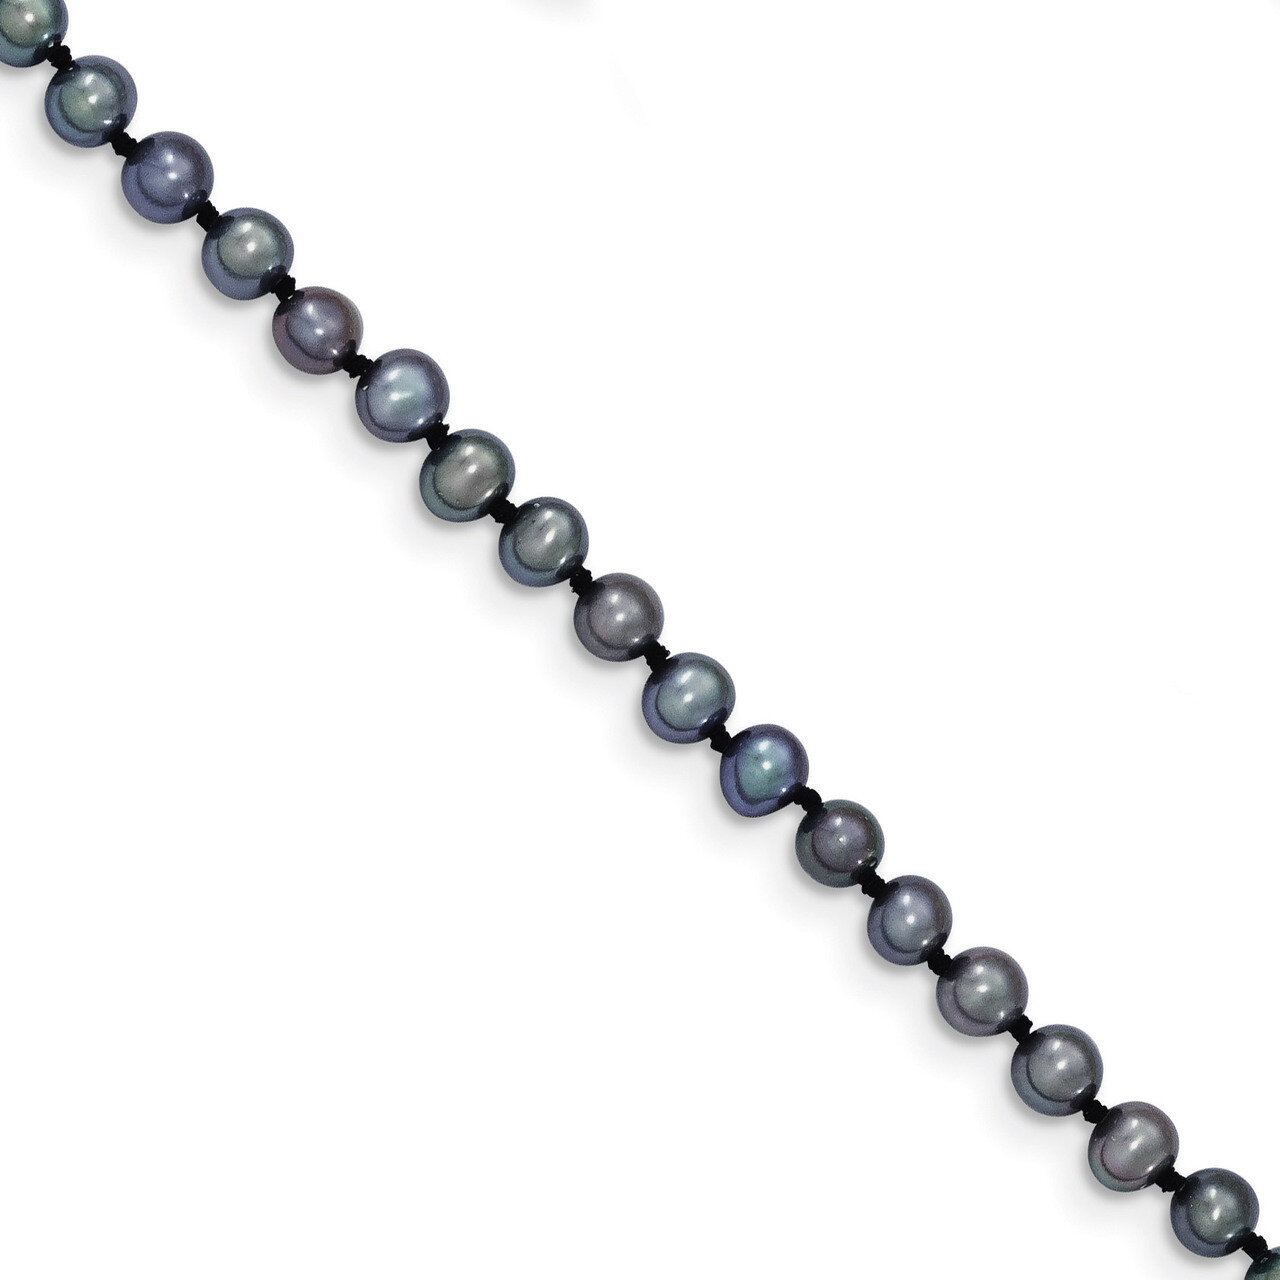 4-5mm Black Cultured Near Round Pearl Necklace 20 Inch 14k Gold BPN040-20